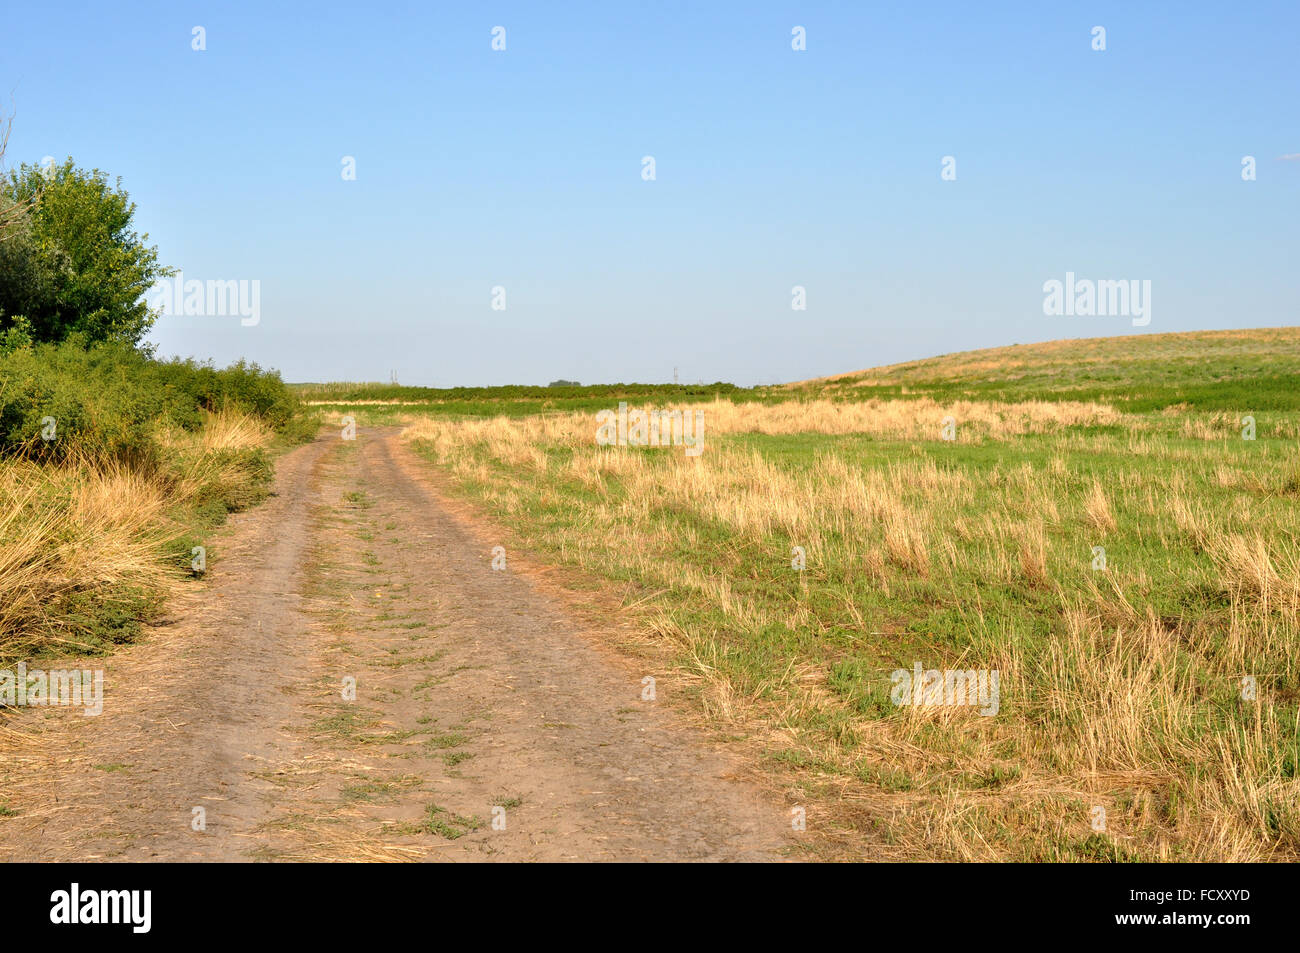 Summer field with burned grass and road in Russia Stock Photo